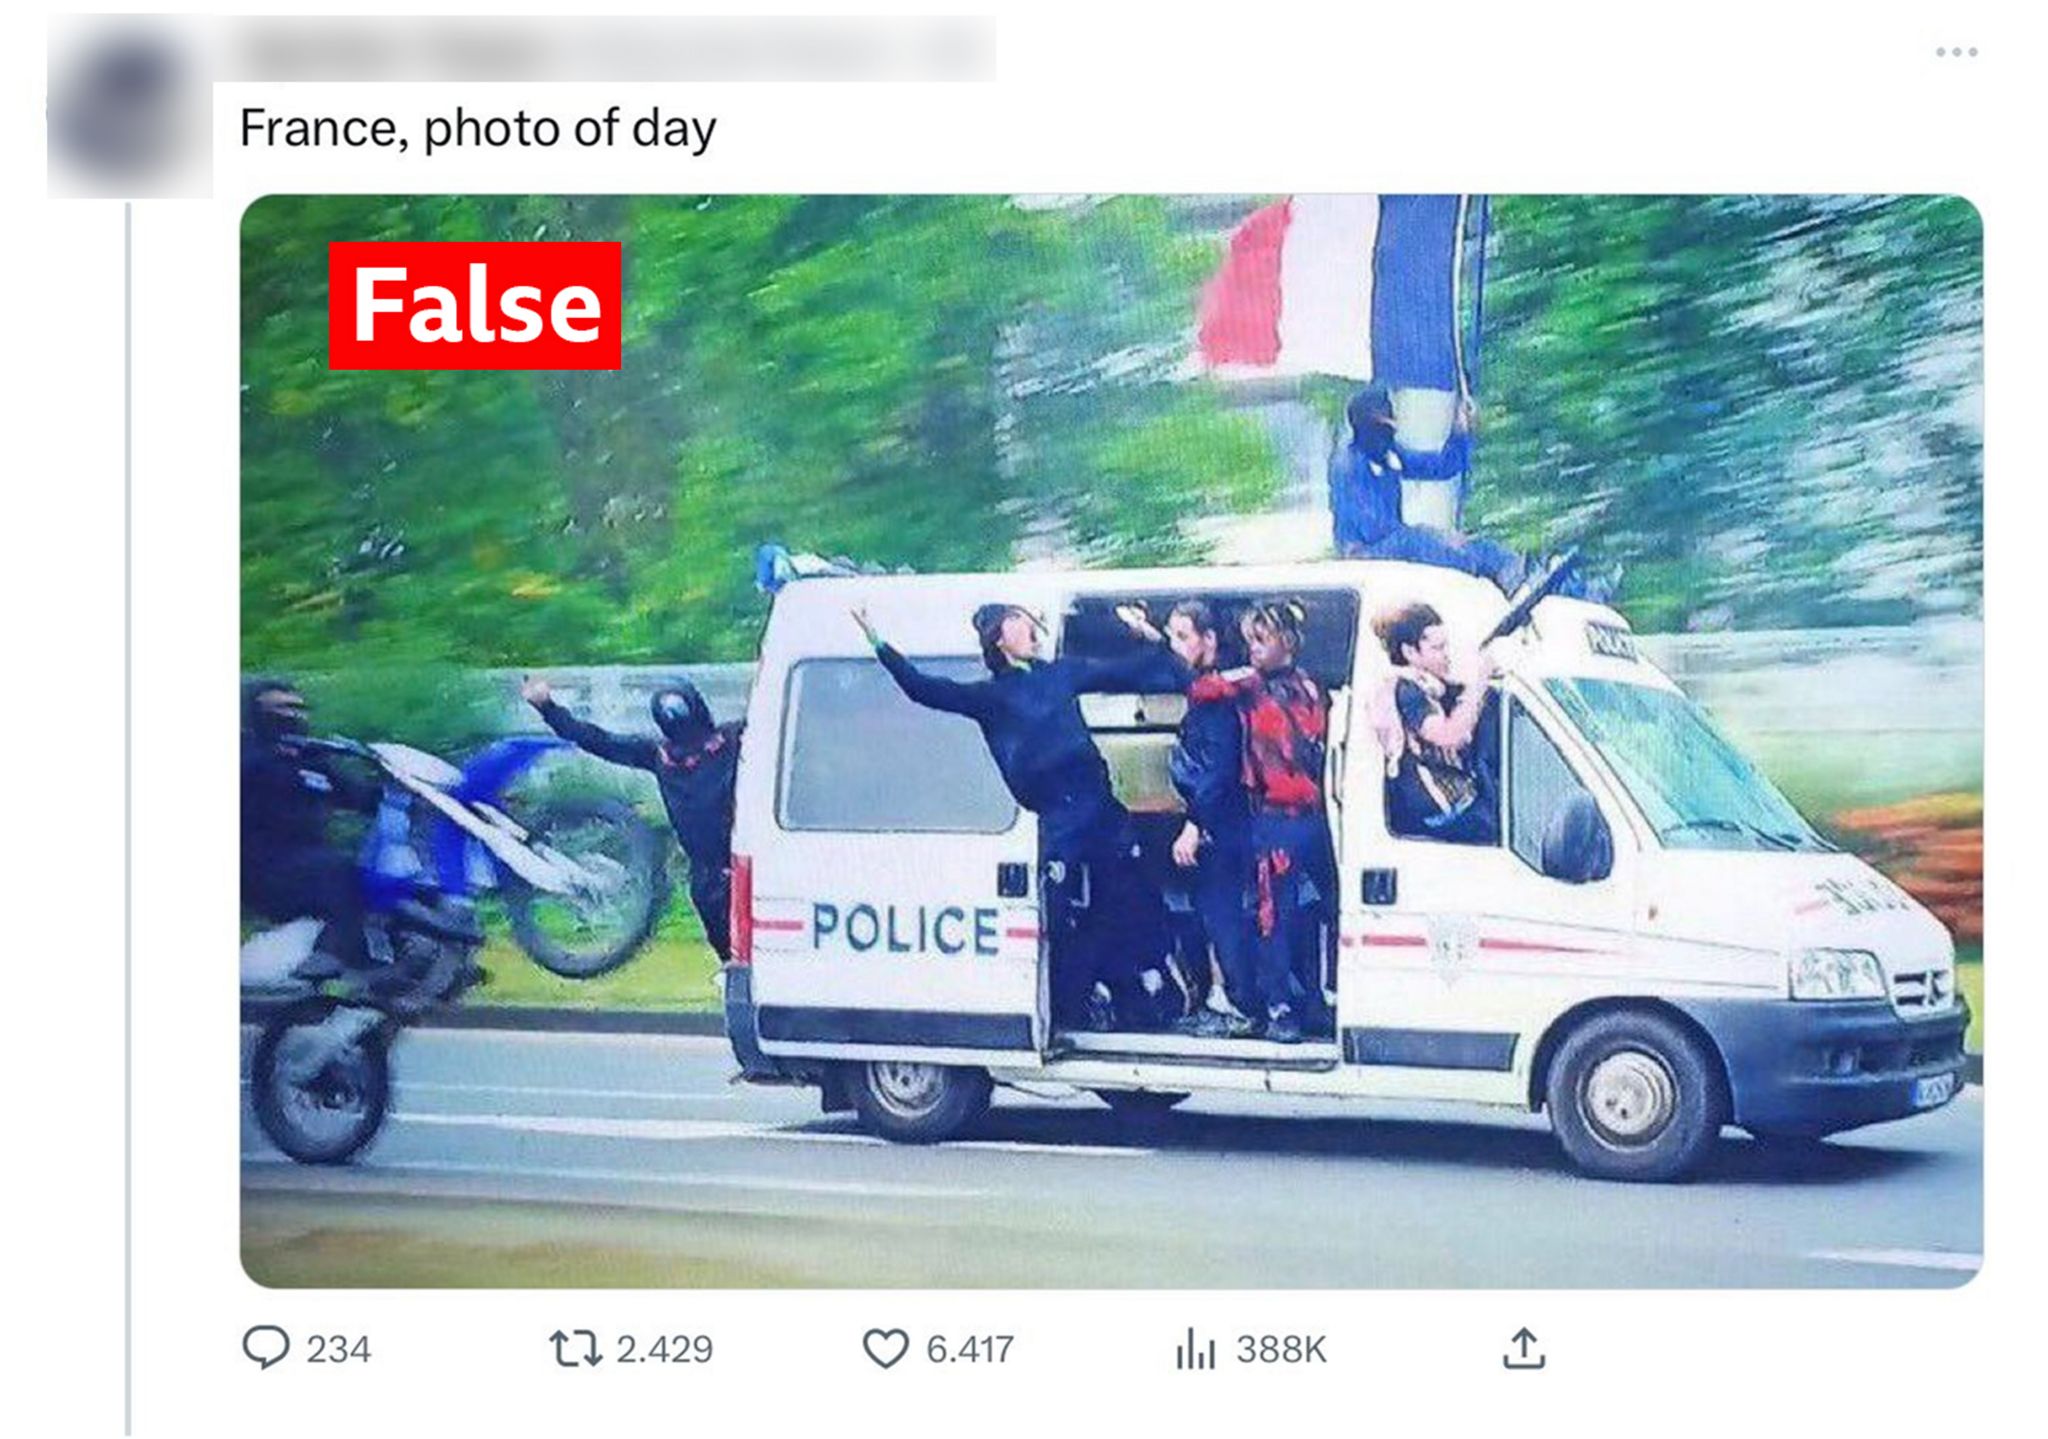 A picture of a police car with rioters taken from a tweet and and labelled andquot;False"